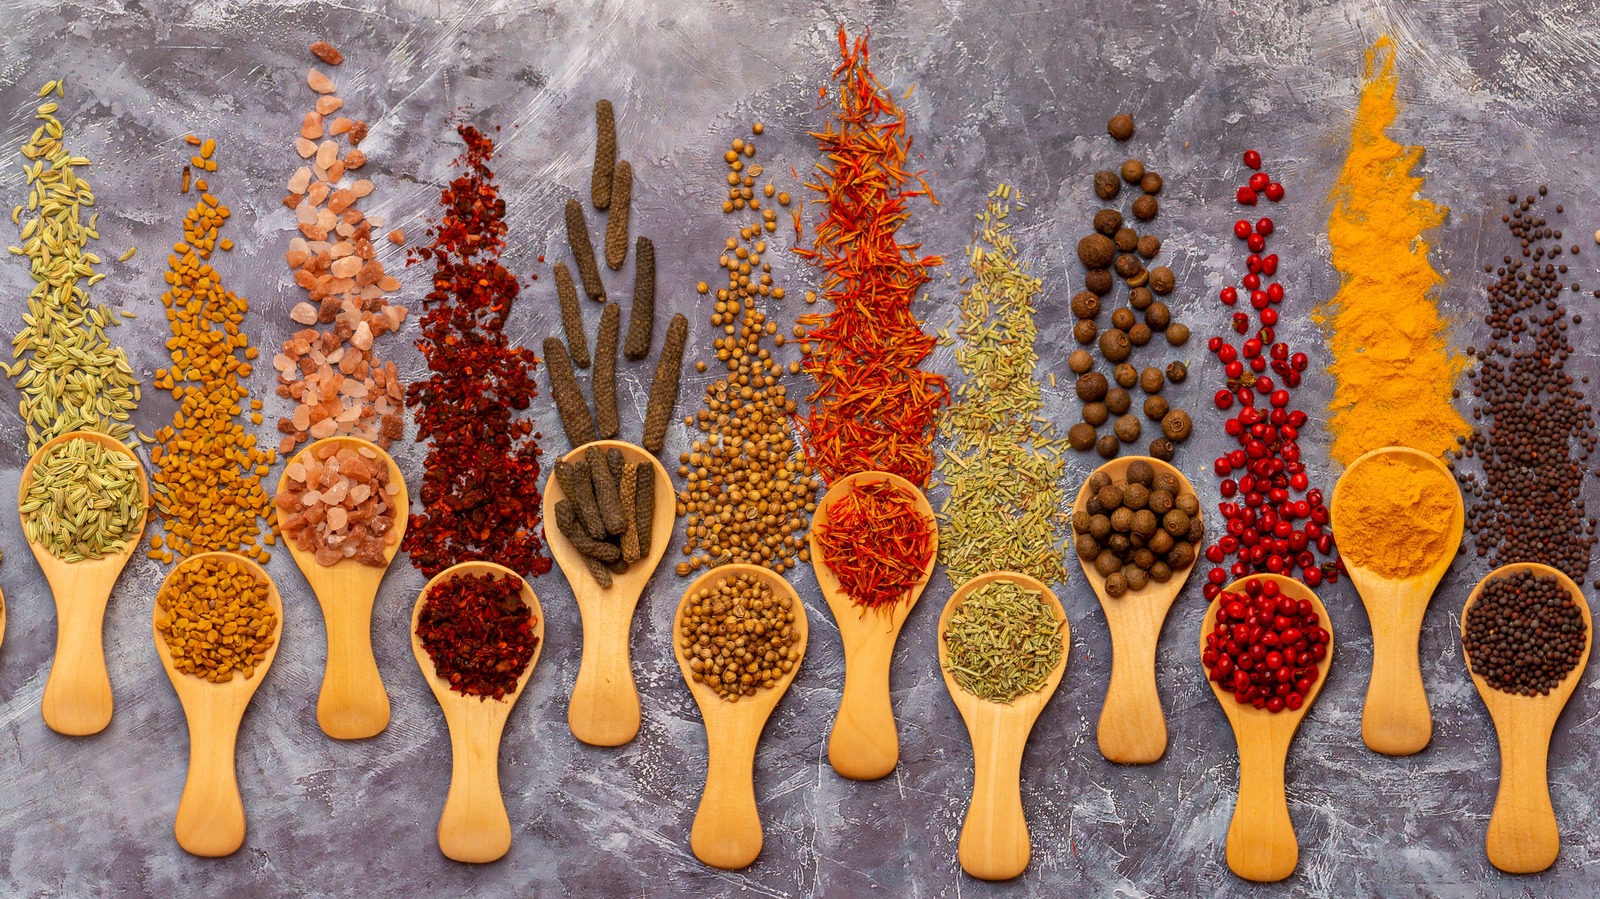 For the Most Even Seasoning, Use a Spice Strainer